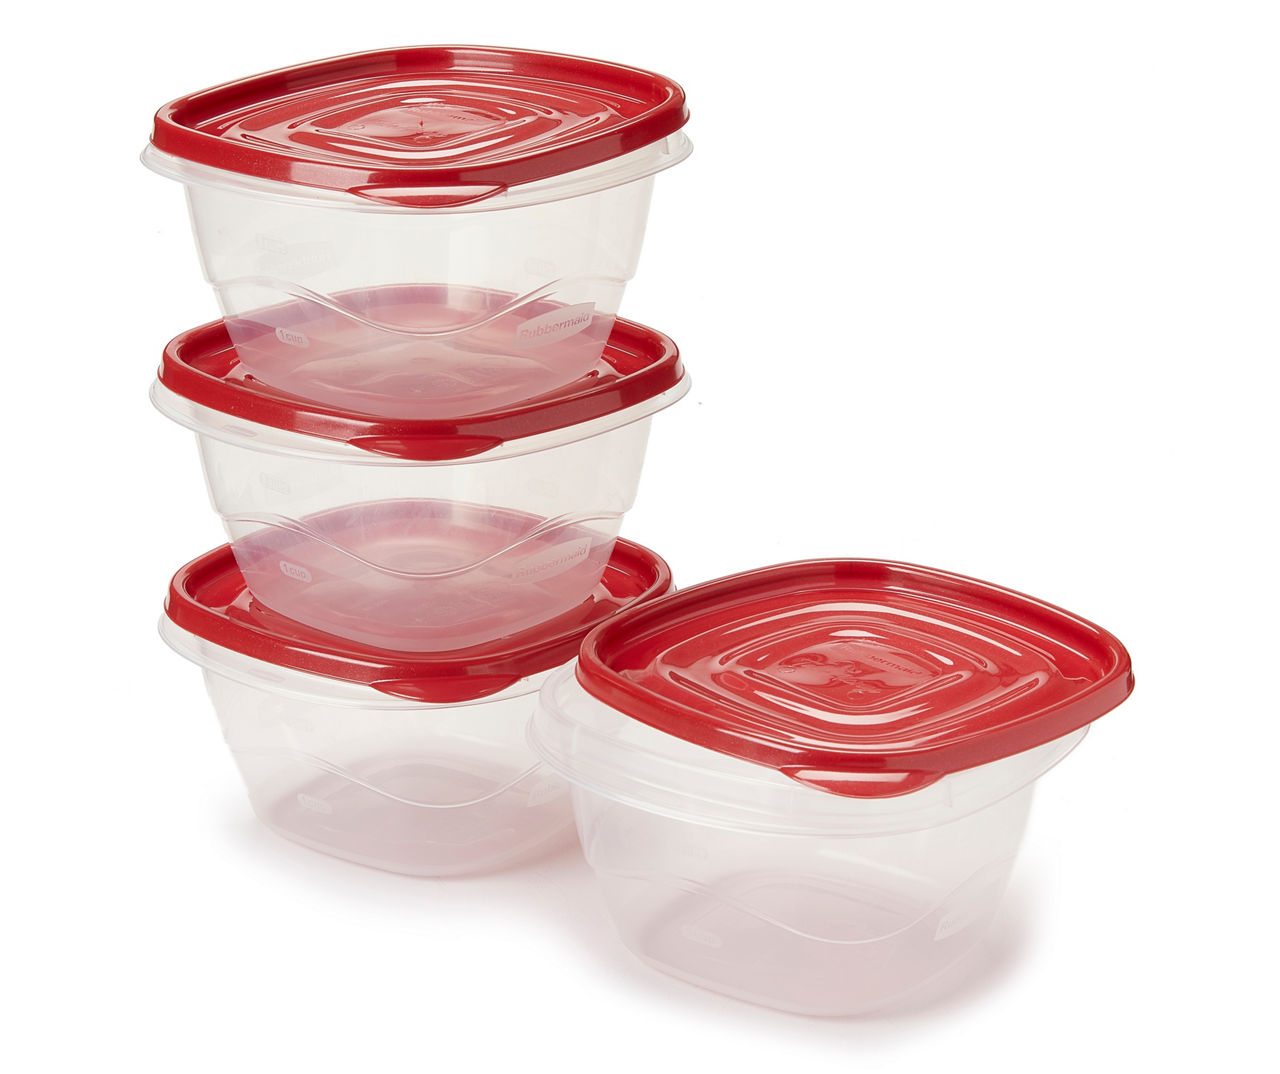 Rubbermaid Easy Find Vented Lids Food Storage Containers, Set of